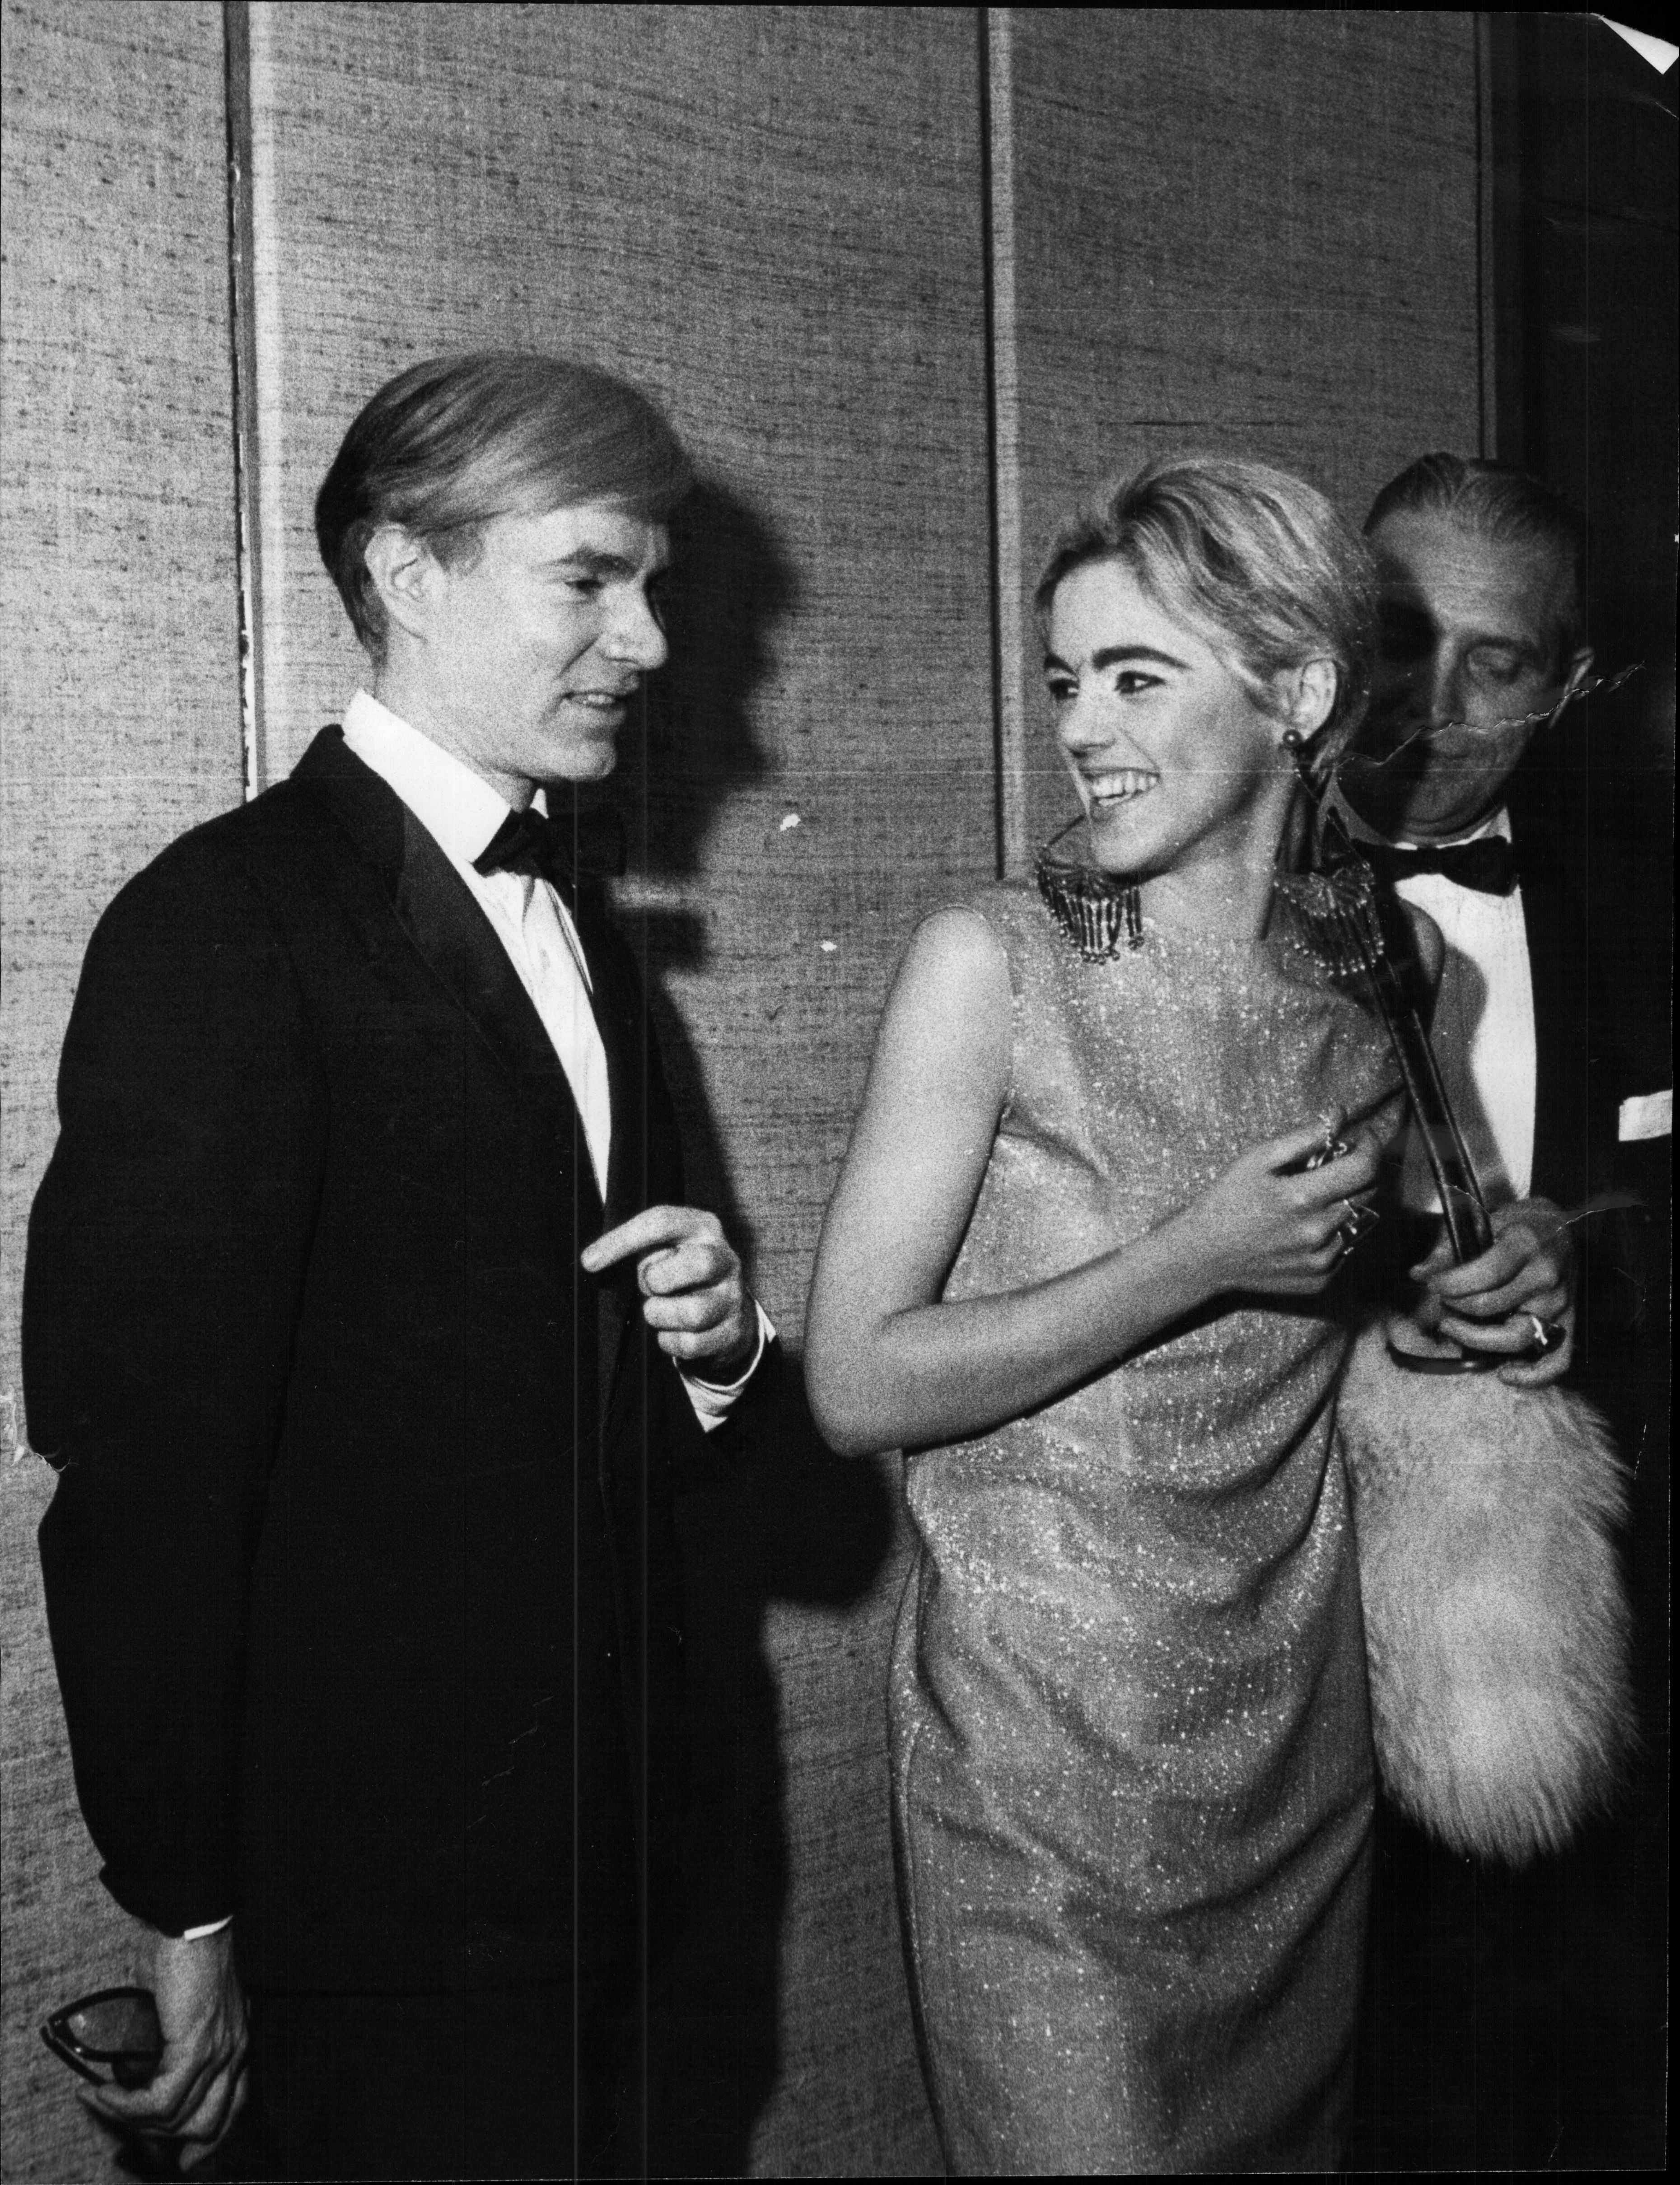 Mandatory Credit: Photo by ANL/REX/Shutterstock Andy Warhol Artist And Edie Sedgwick Actress At Vidal Sassoon's New York Launch Party 1965. Andy Warhol Artist And Edie Sedgwick Actress At Vidal Sassoon's New York Launch Party 1965.